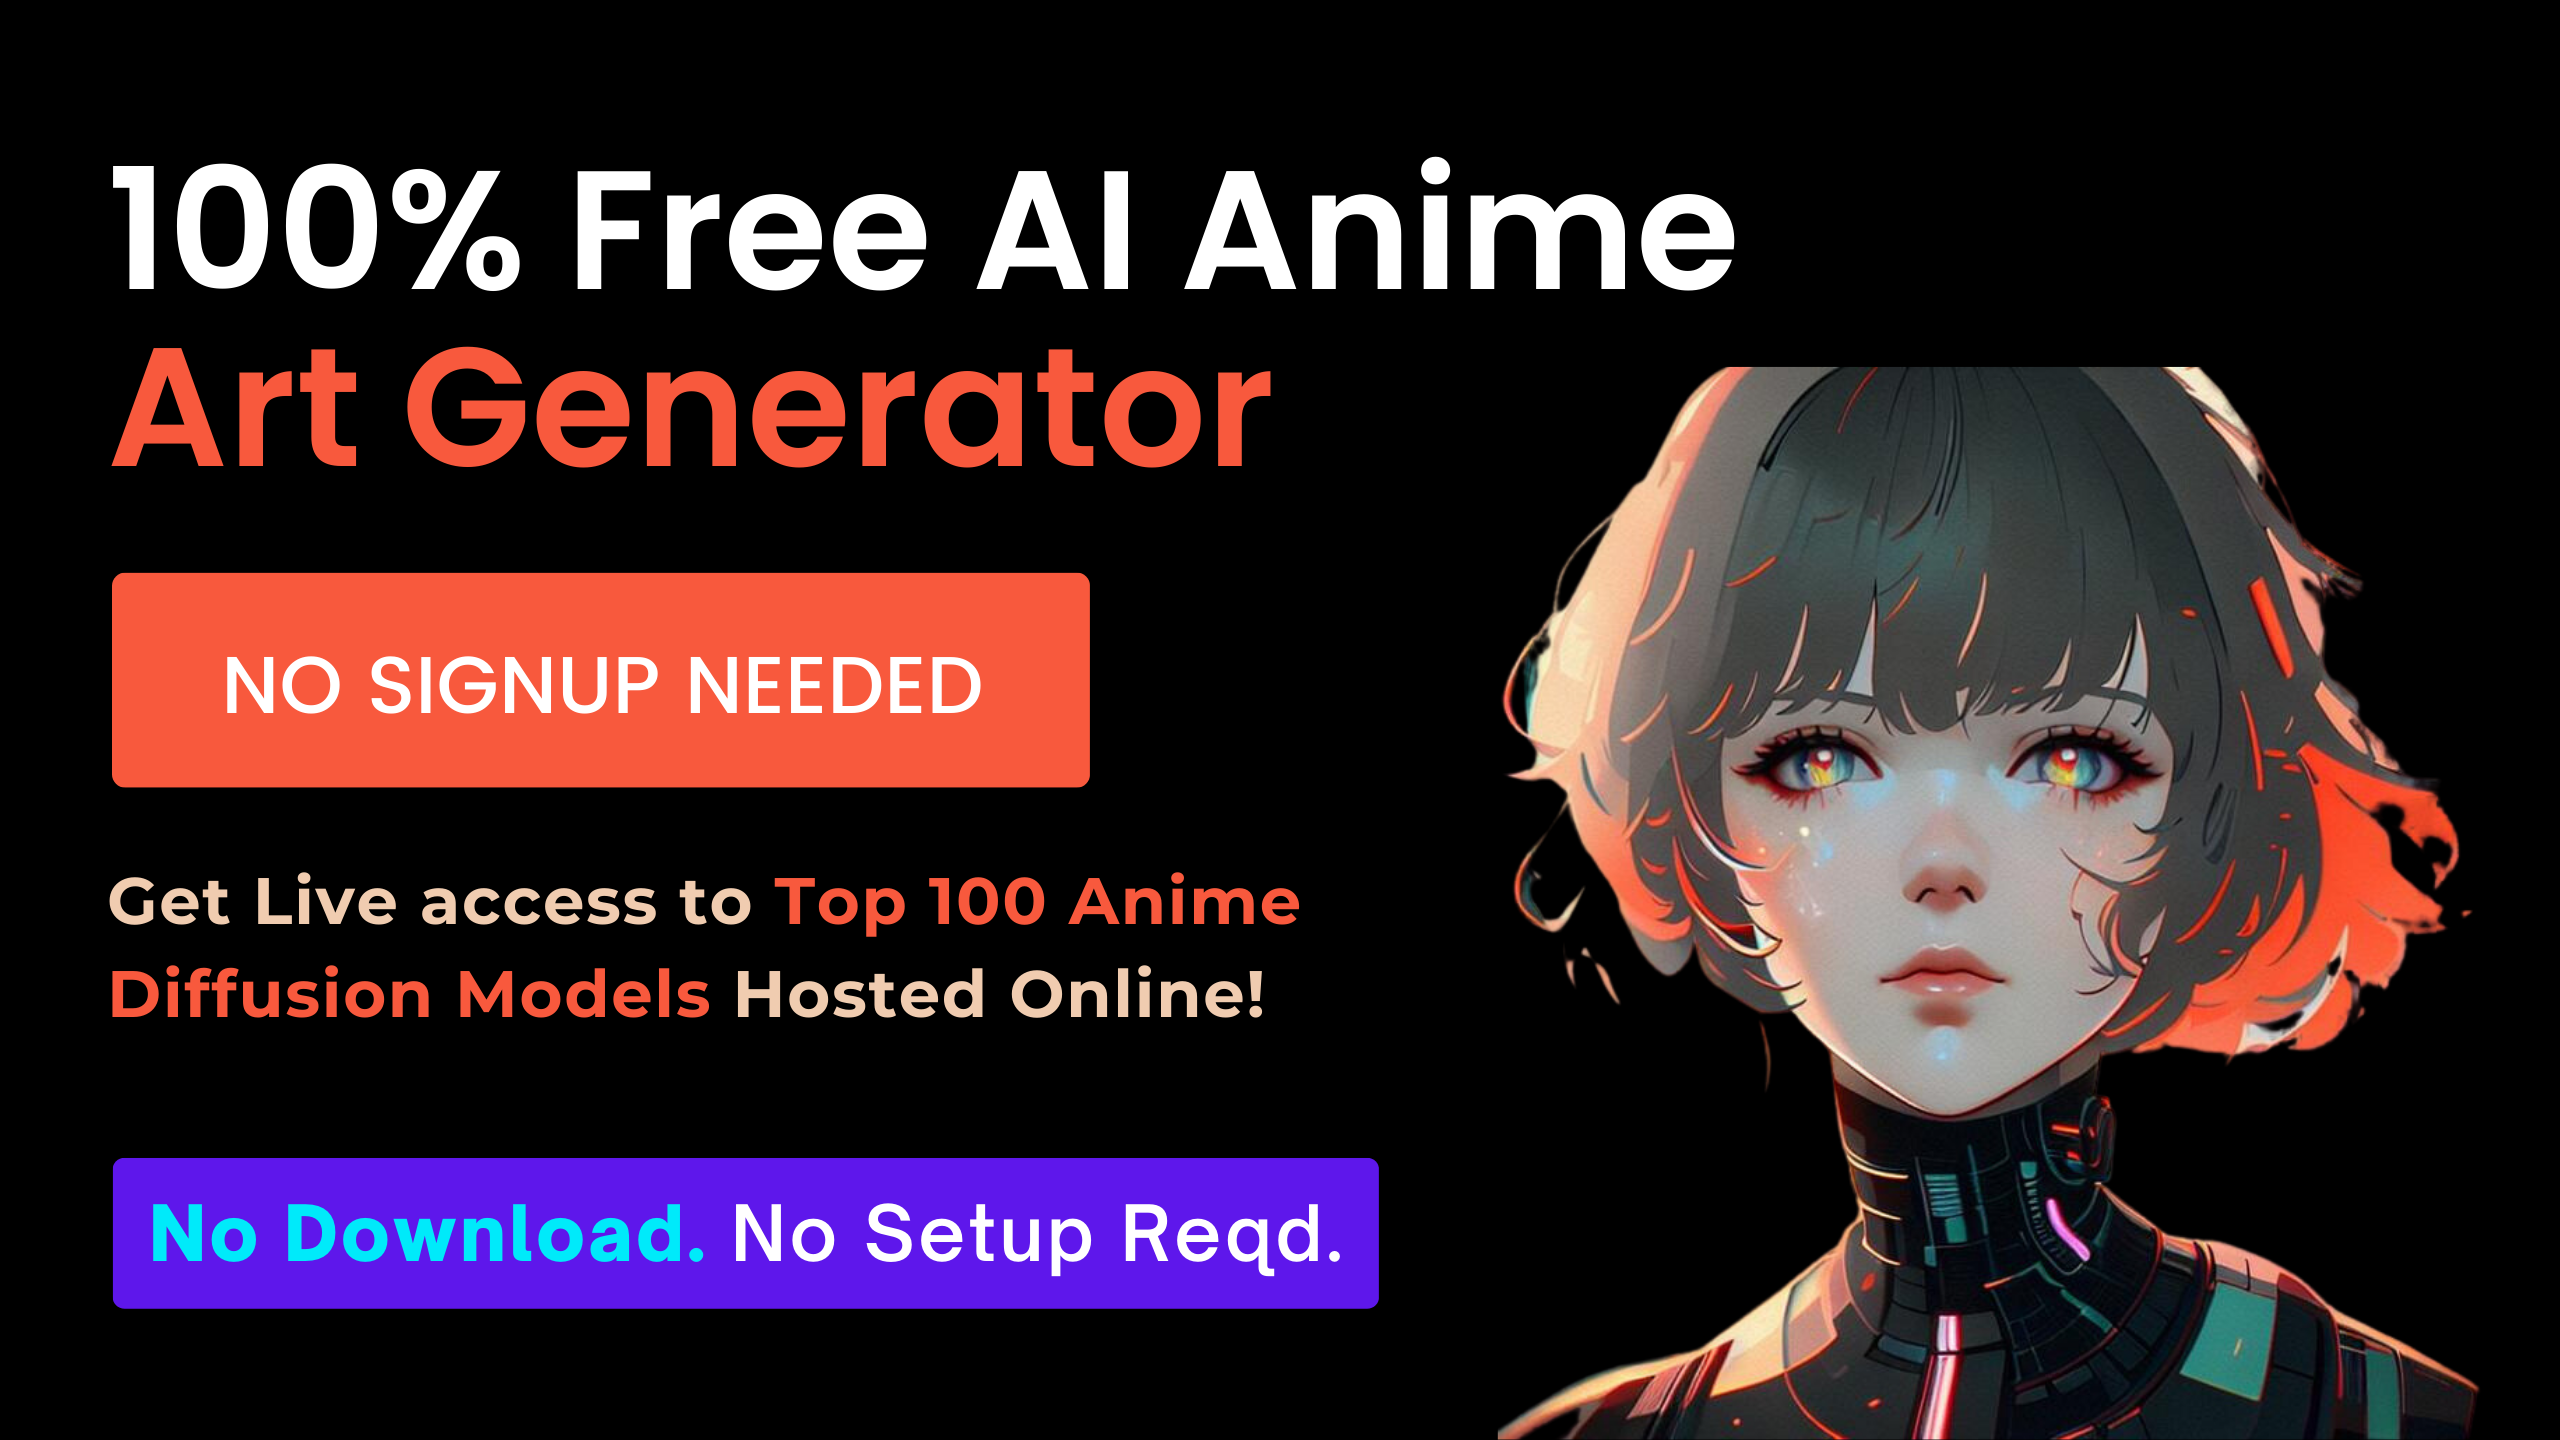 AI Anime Art Generator Reviews 2023: Details, Pricing, & Features